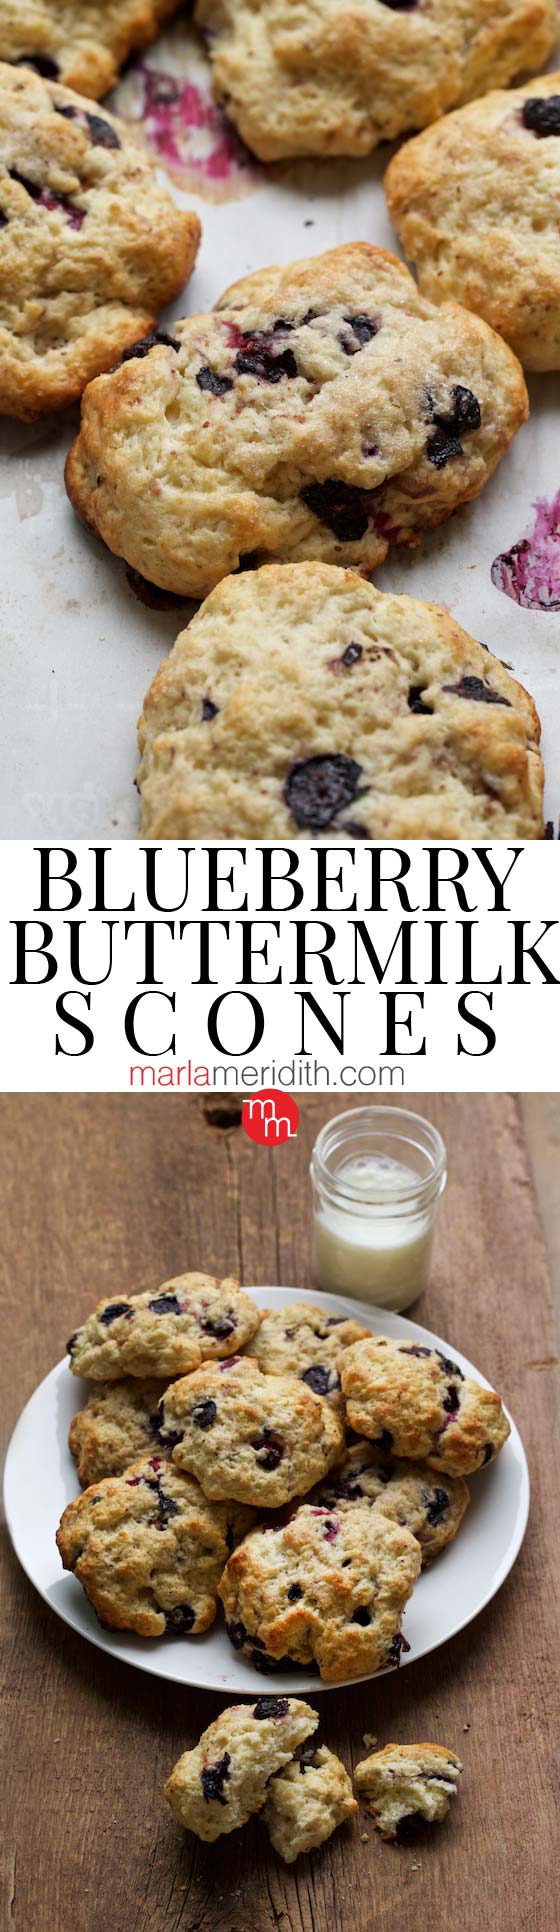 These are the Ultimate Blueberry Buttermilk Scones...bake some today! MarlaMeridith.com #baking #blueberry #scones